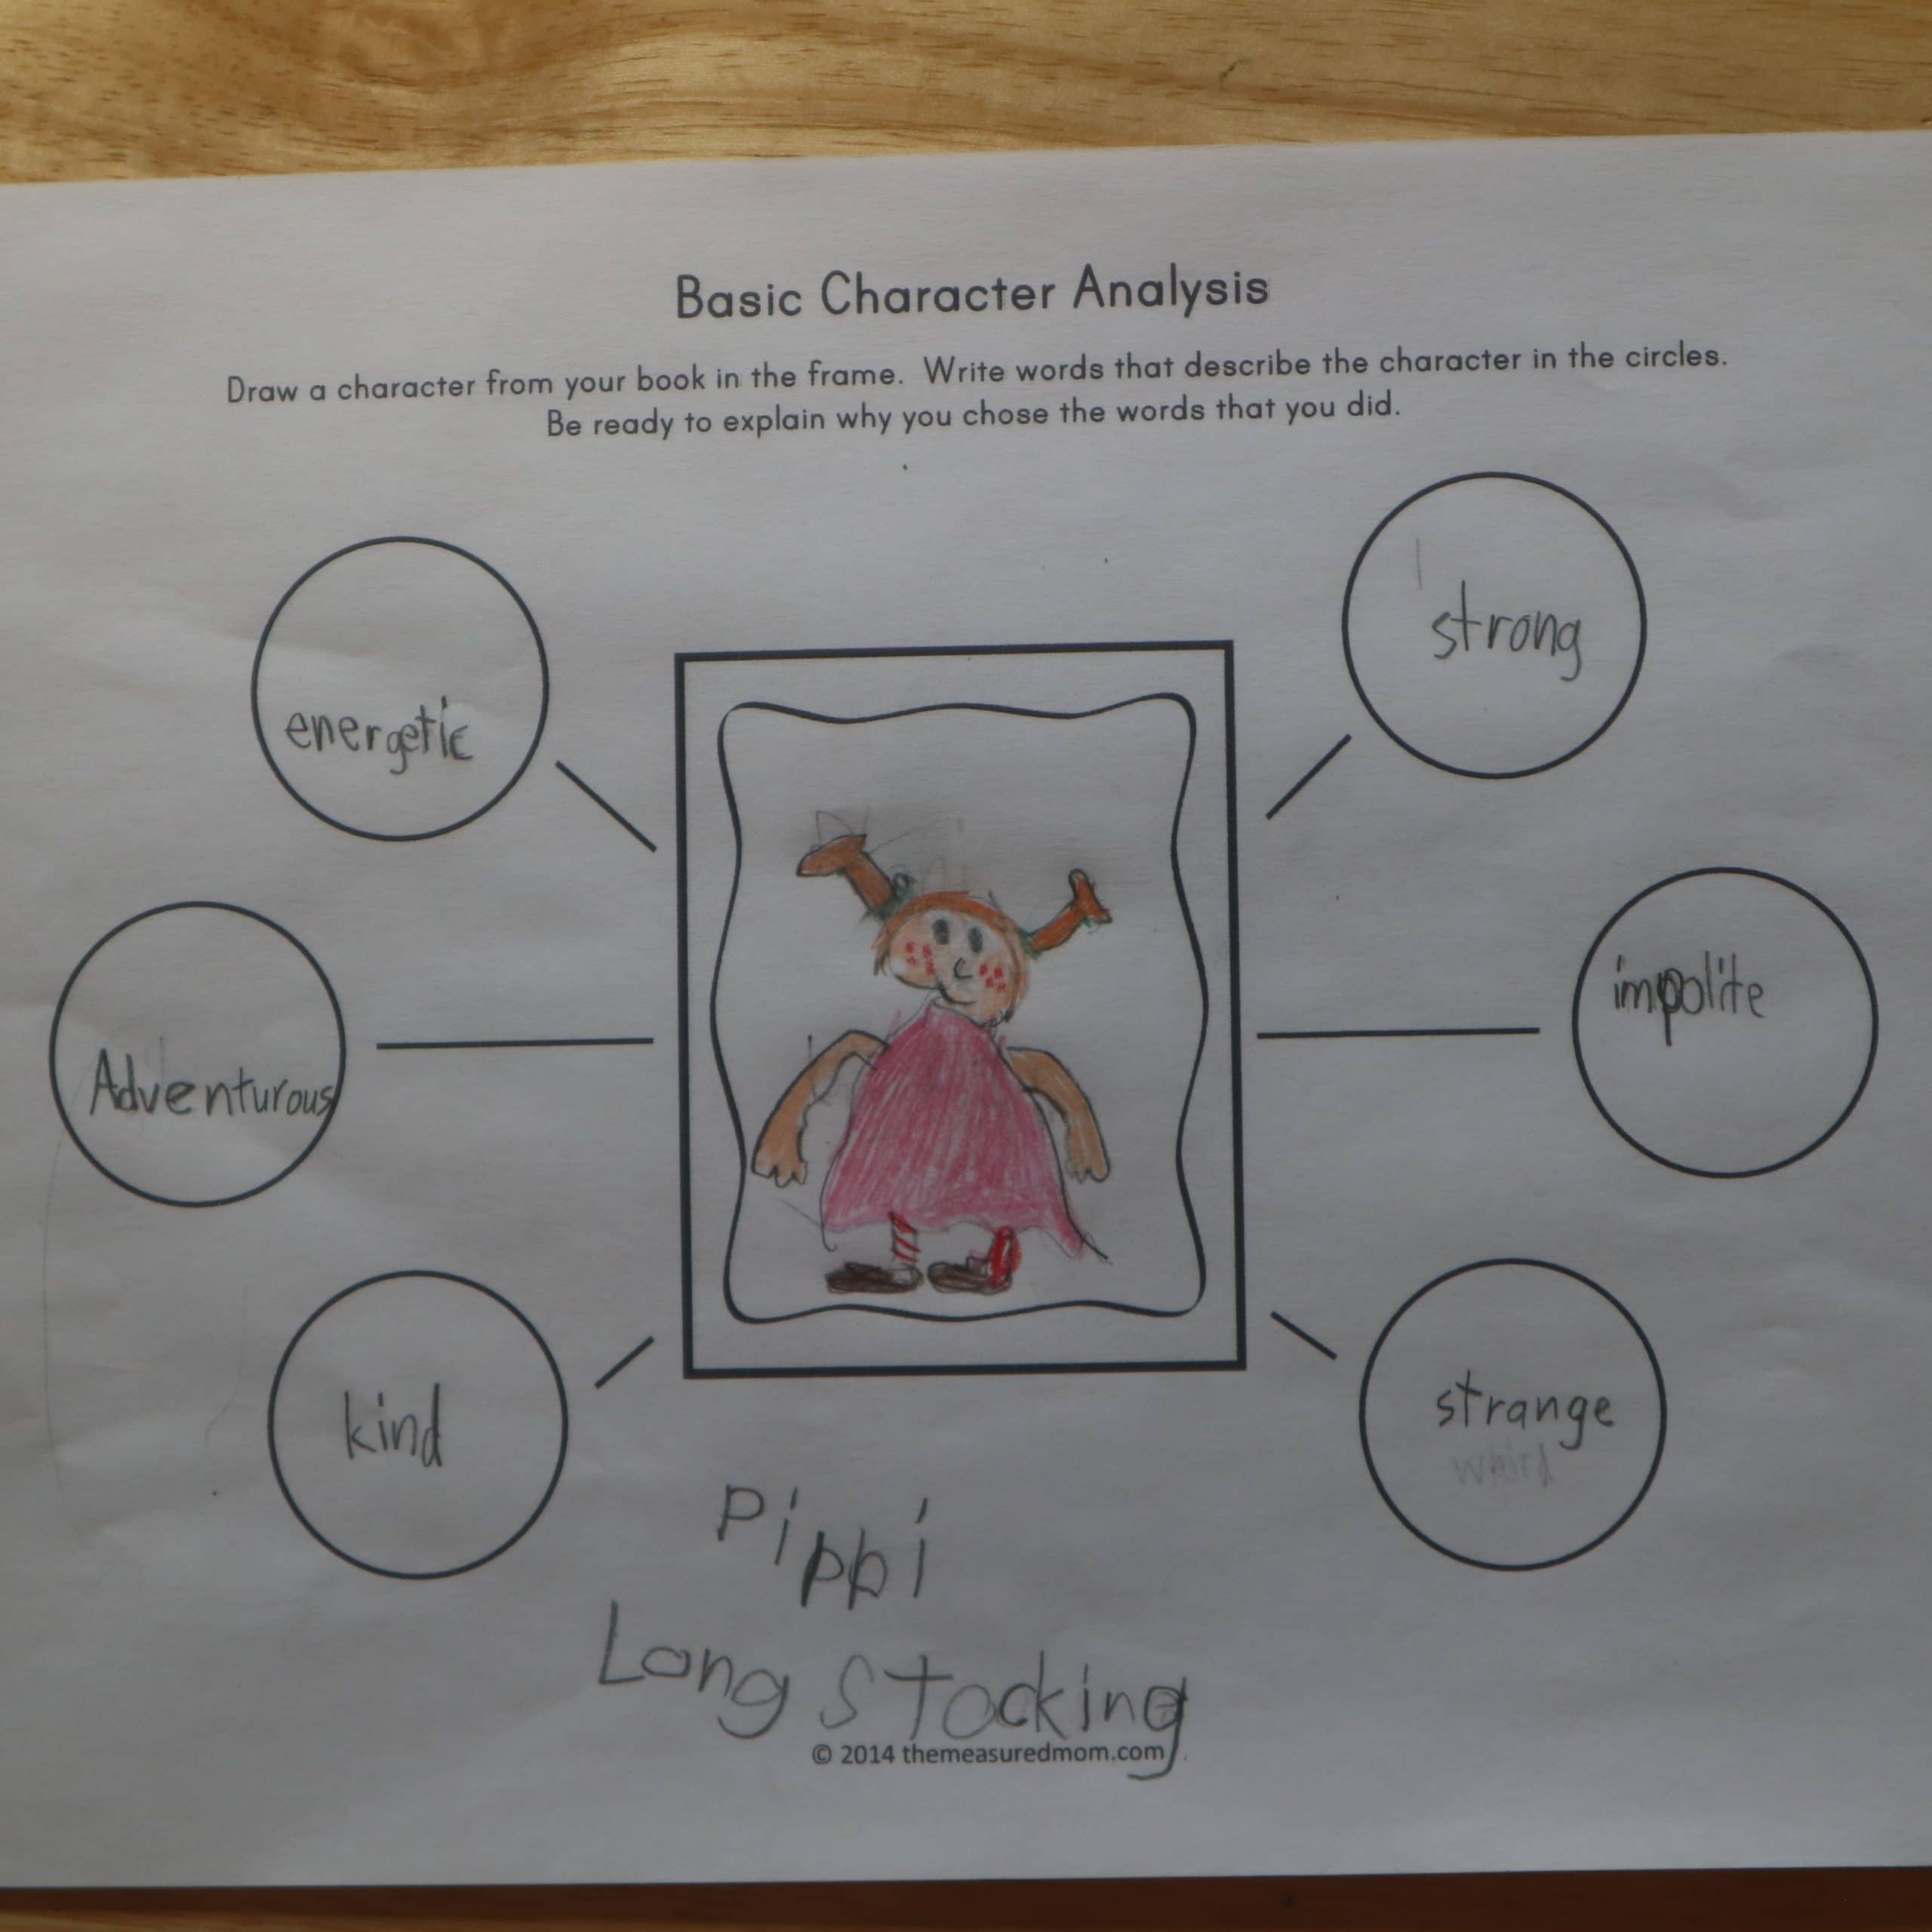 Character analysis worksheet - The Measured Mom With Character Traits Worksheet 3rd Grade